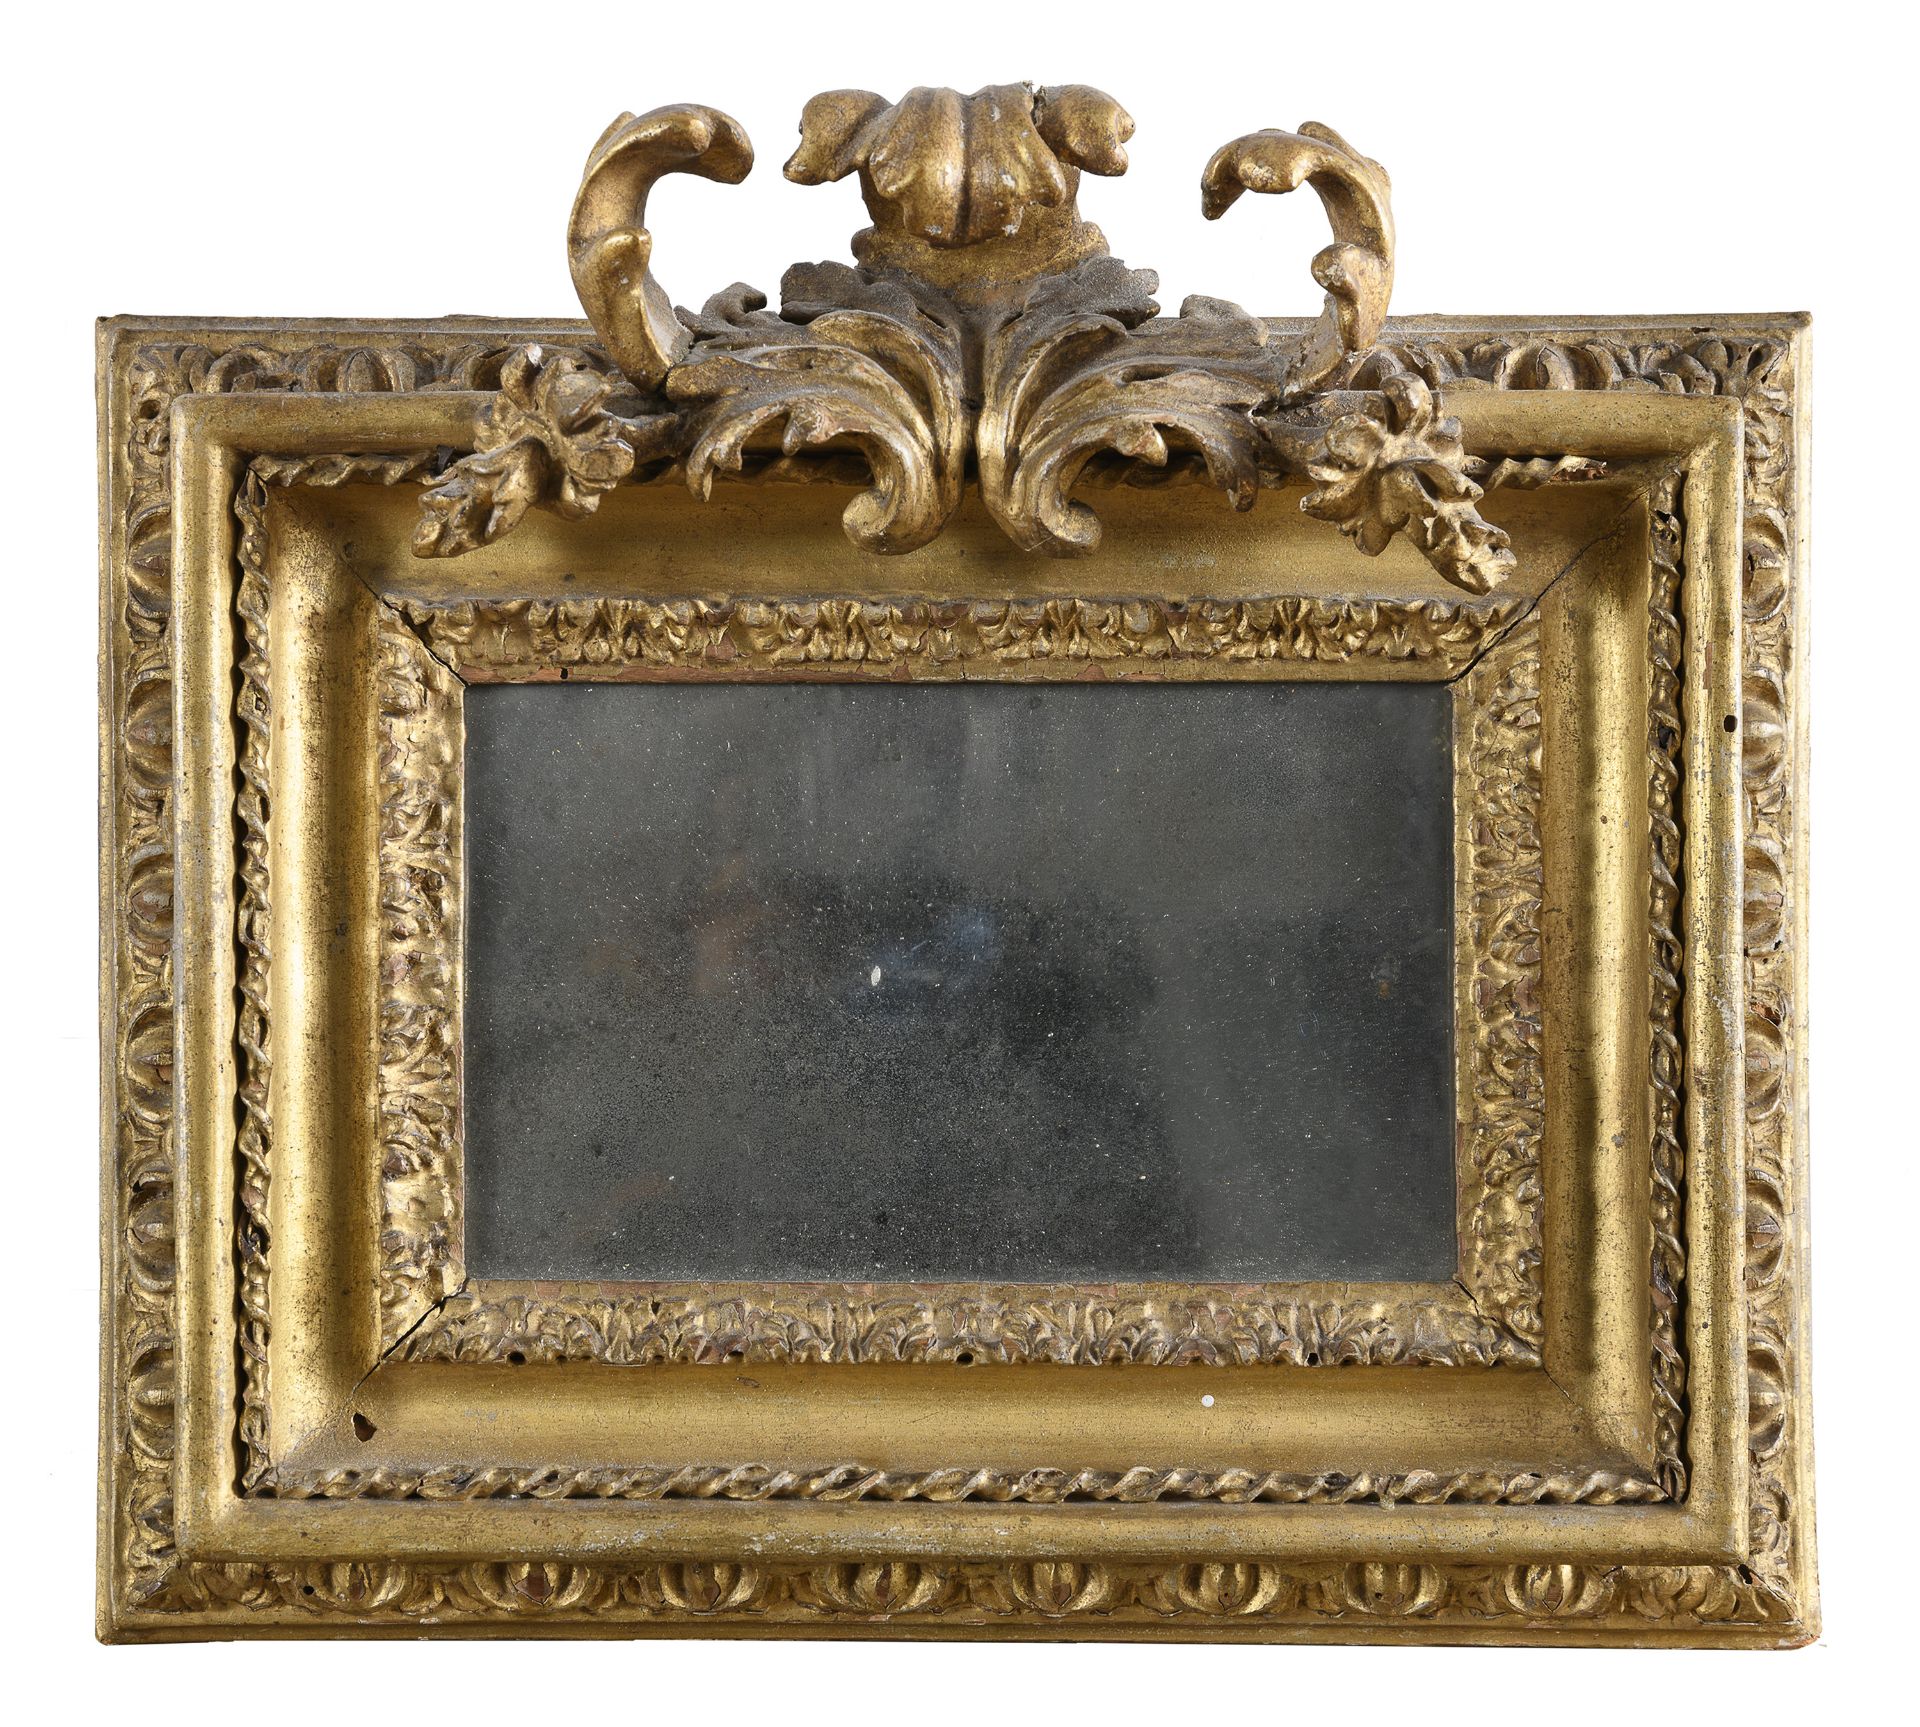 PAIR OF GILTWOOD MIRRORS ROME 18TH CENTURY